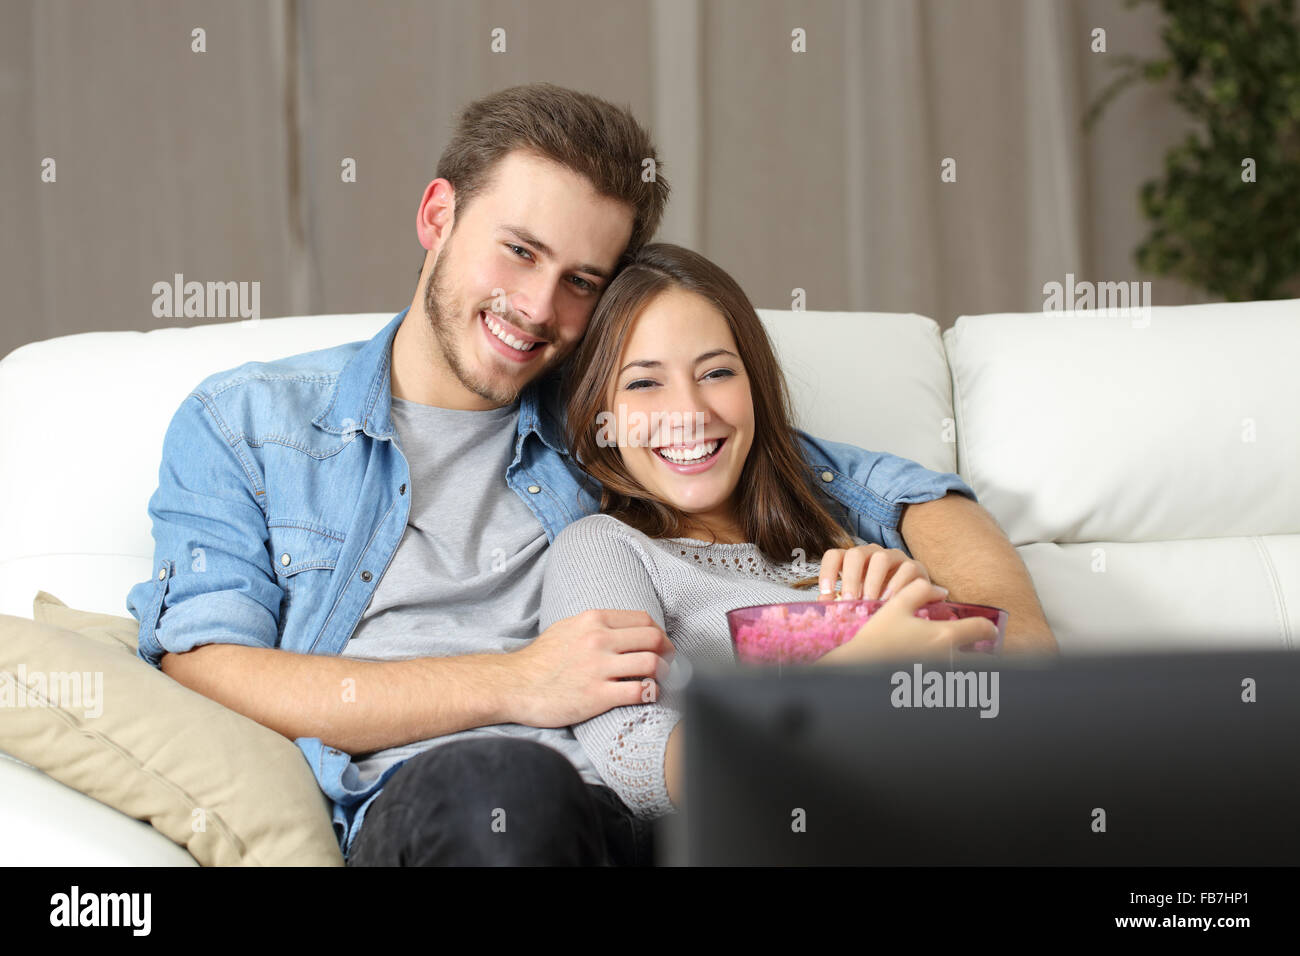 Happy couple watching a movie on tv sitting on a couch at home Stock Photo